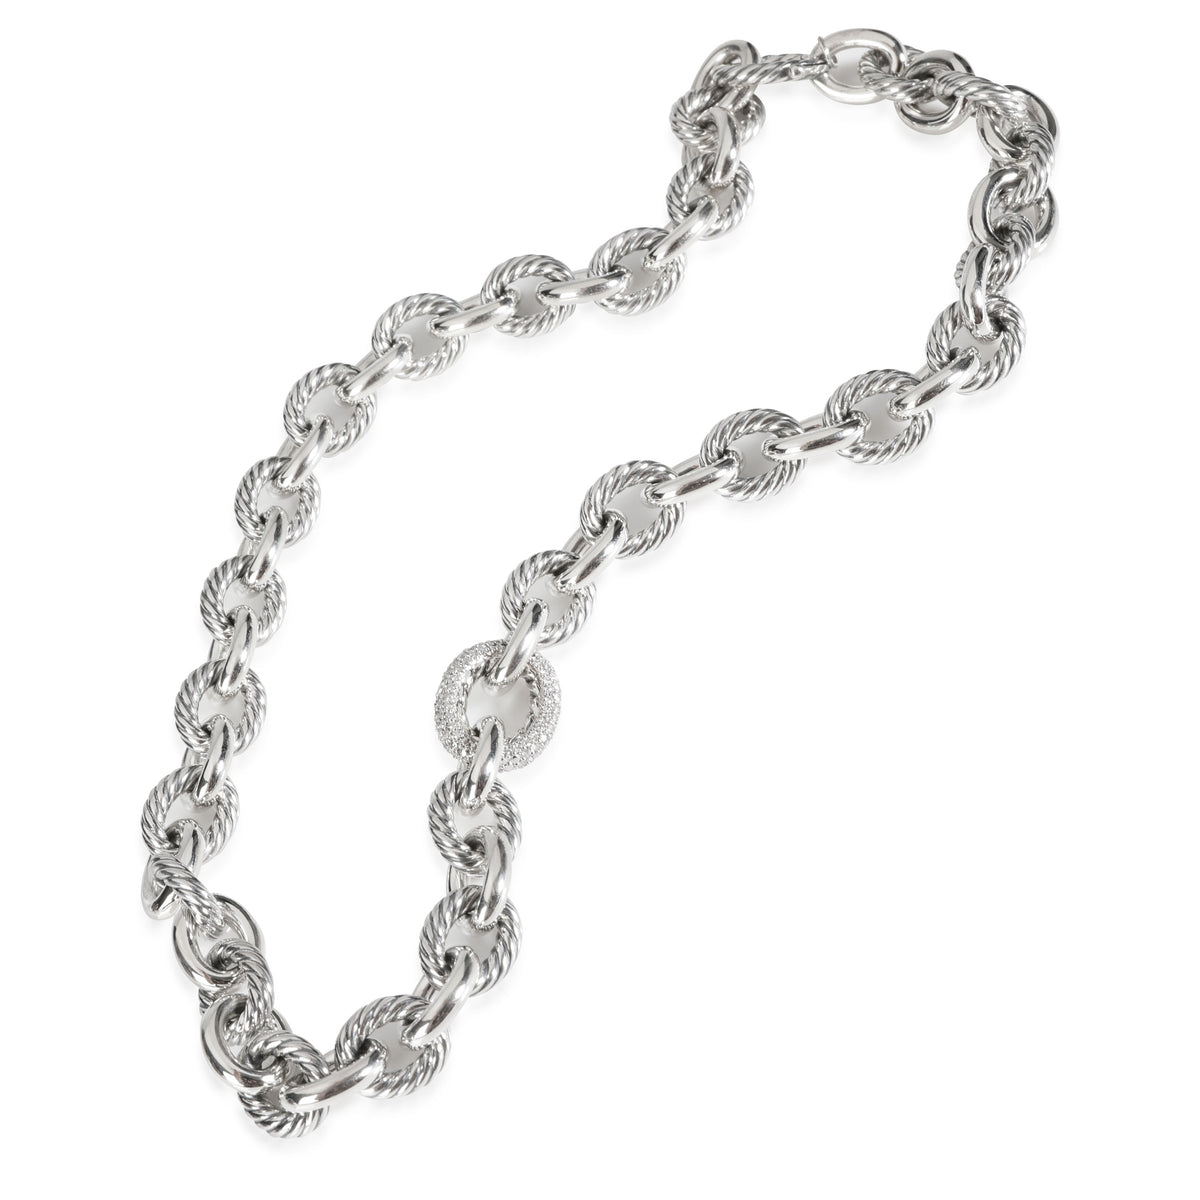 David Yurman Large Oval Link Diamond Necklace in  Sterling Silver 0.80 CTW